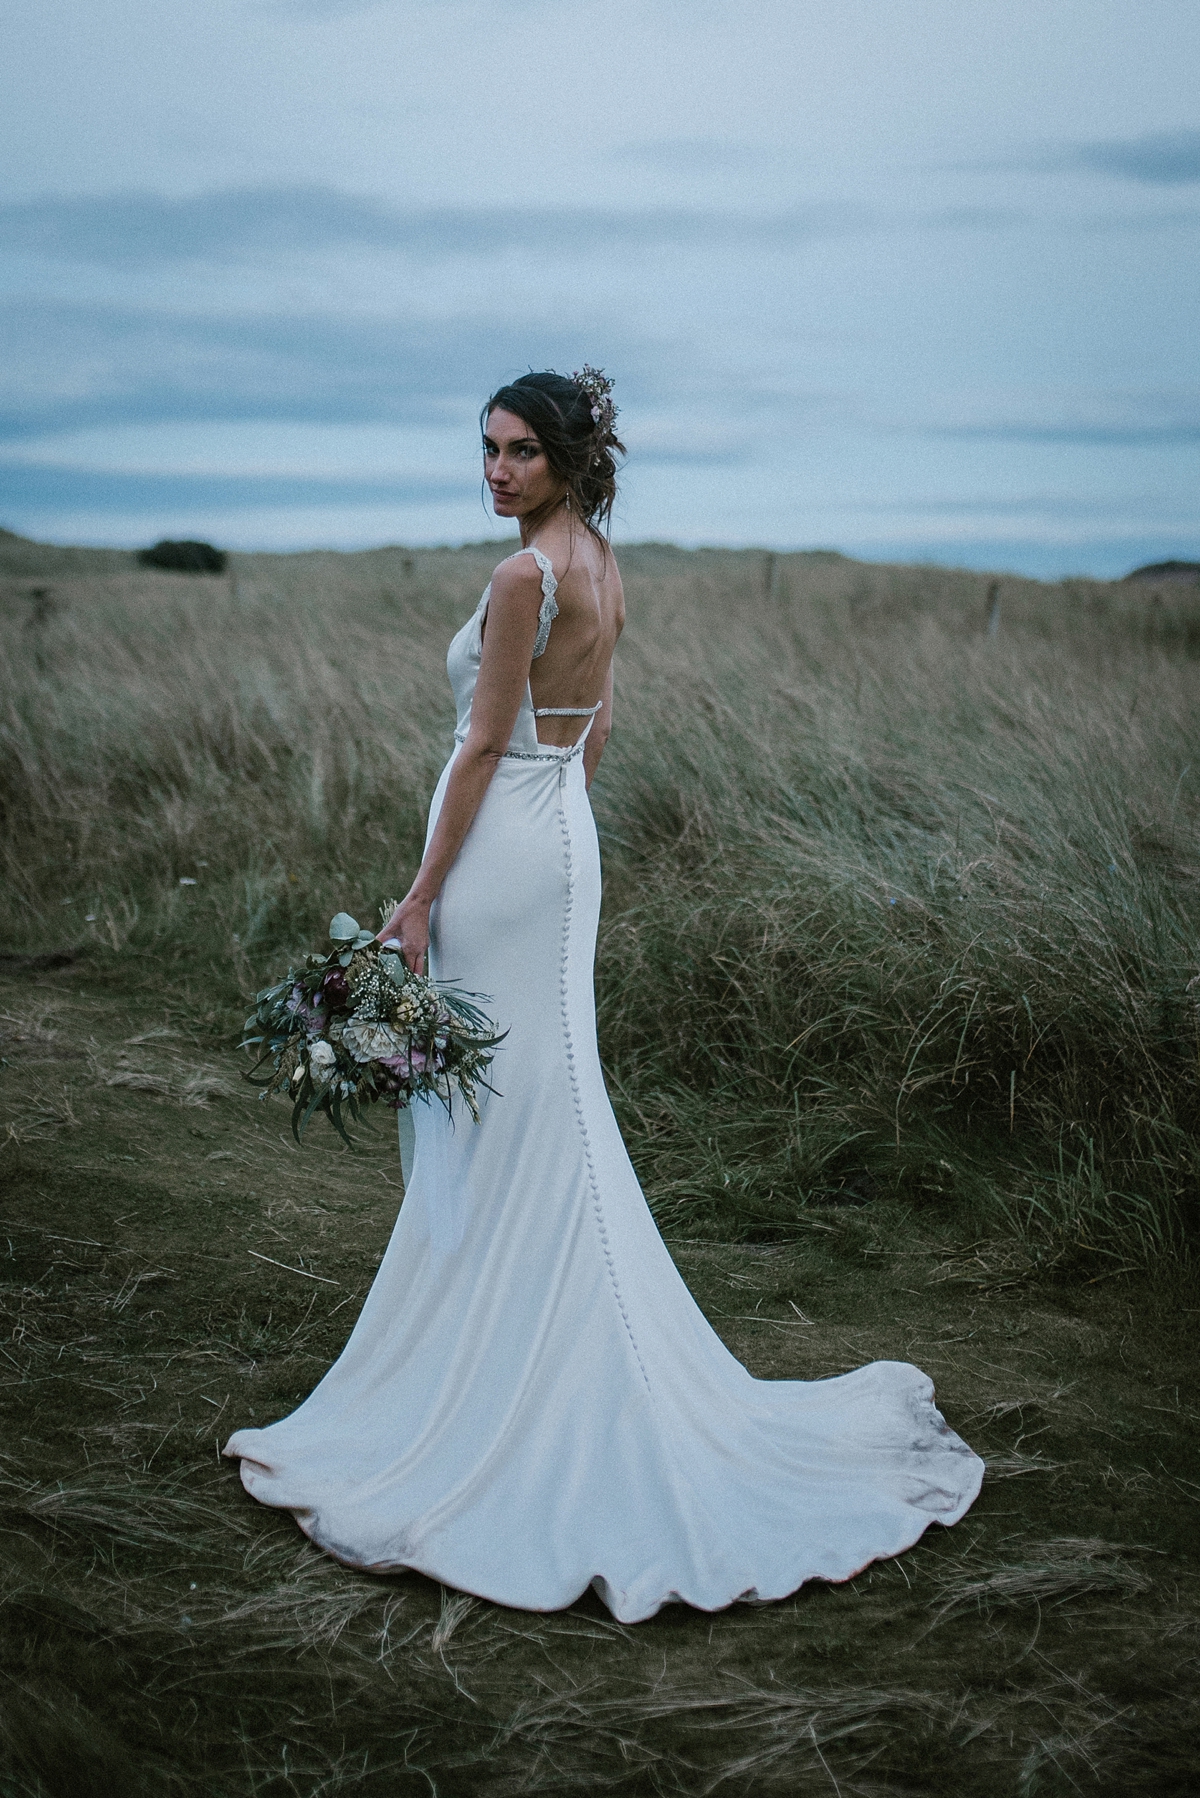 55 A Justin Alexander gown for a romantic outdoor wedding